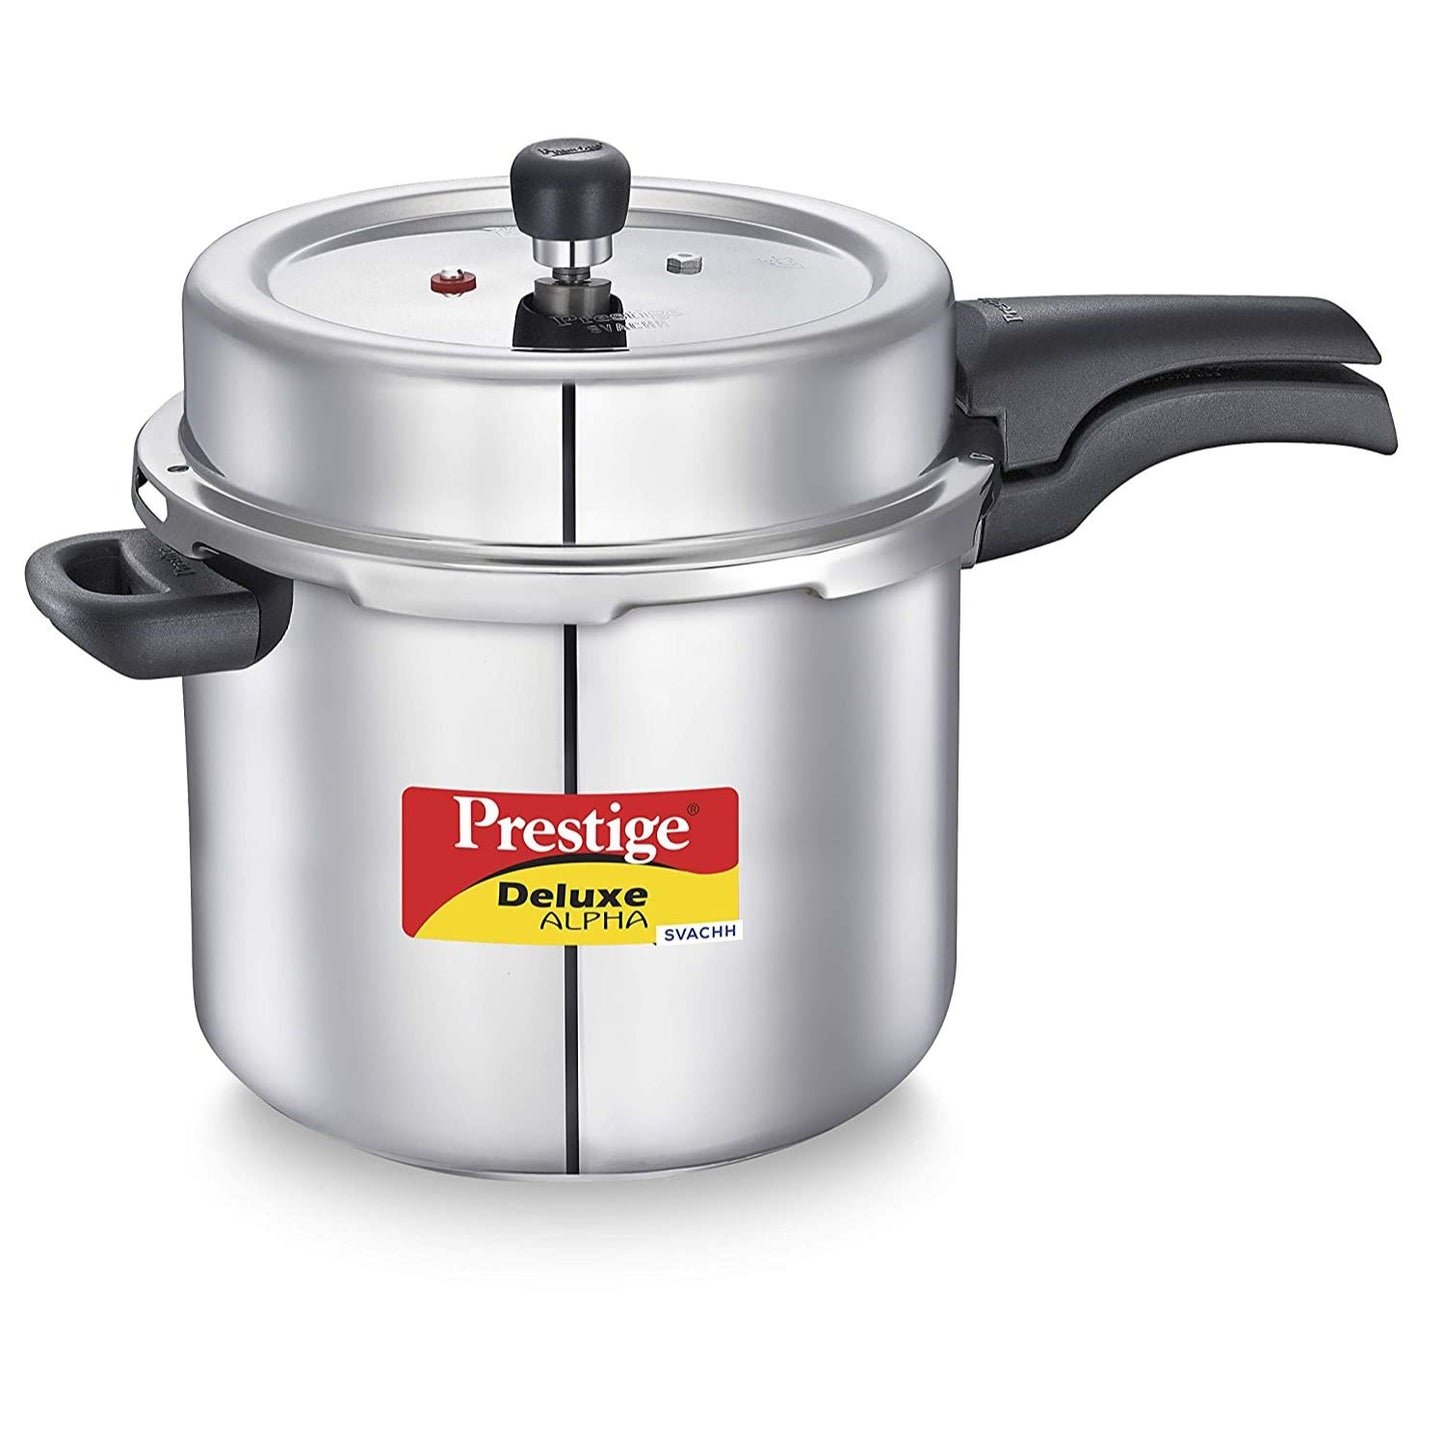 Prestige Deluxe Alpha Svachh Stainless Steel Induction Base Outer Lid Pressure Cooker, 10 Litres